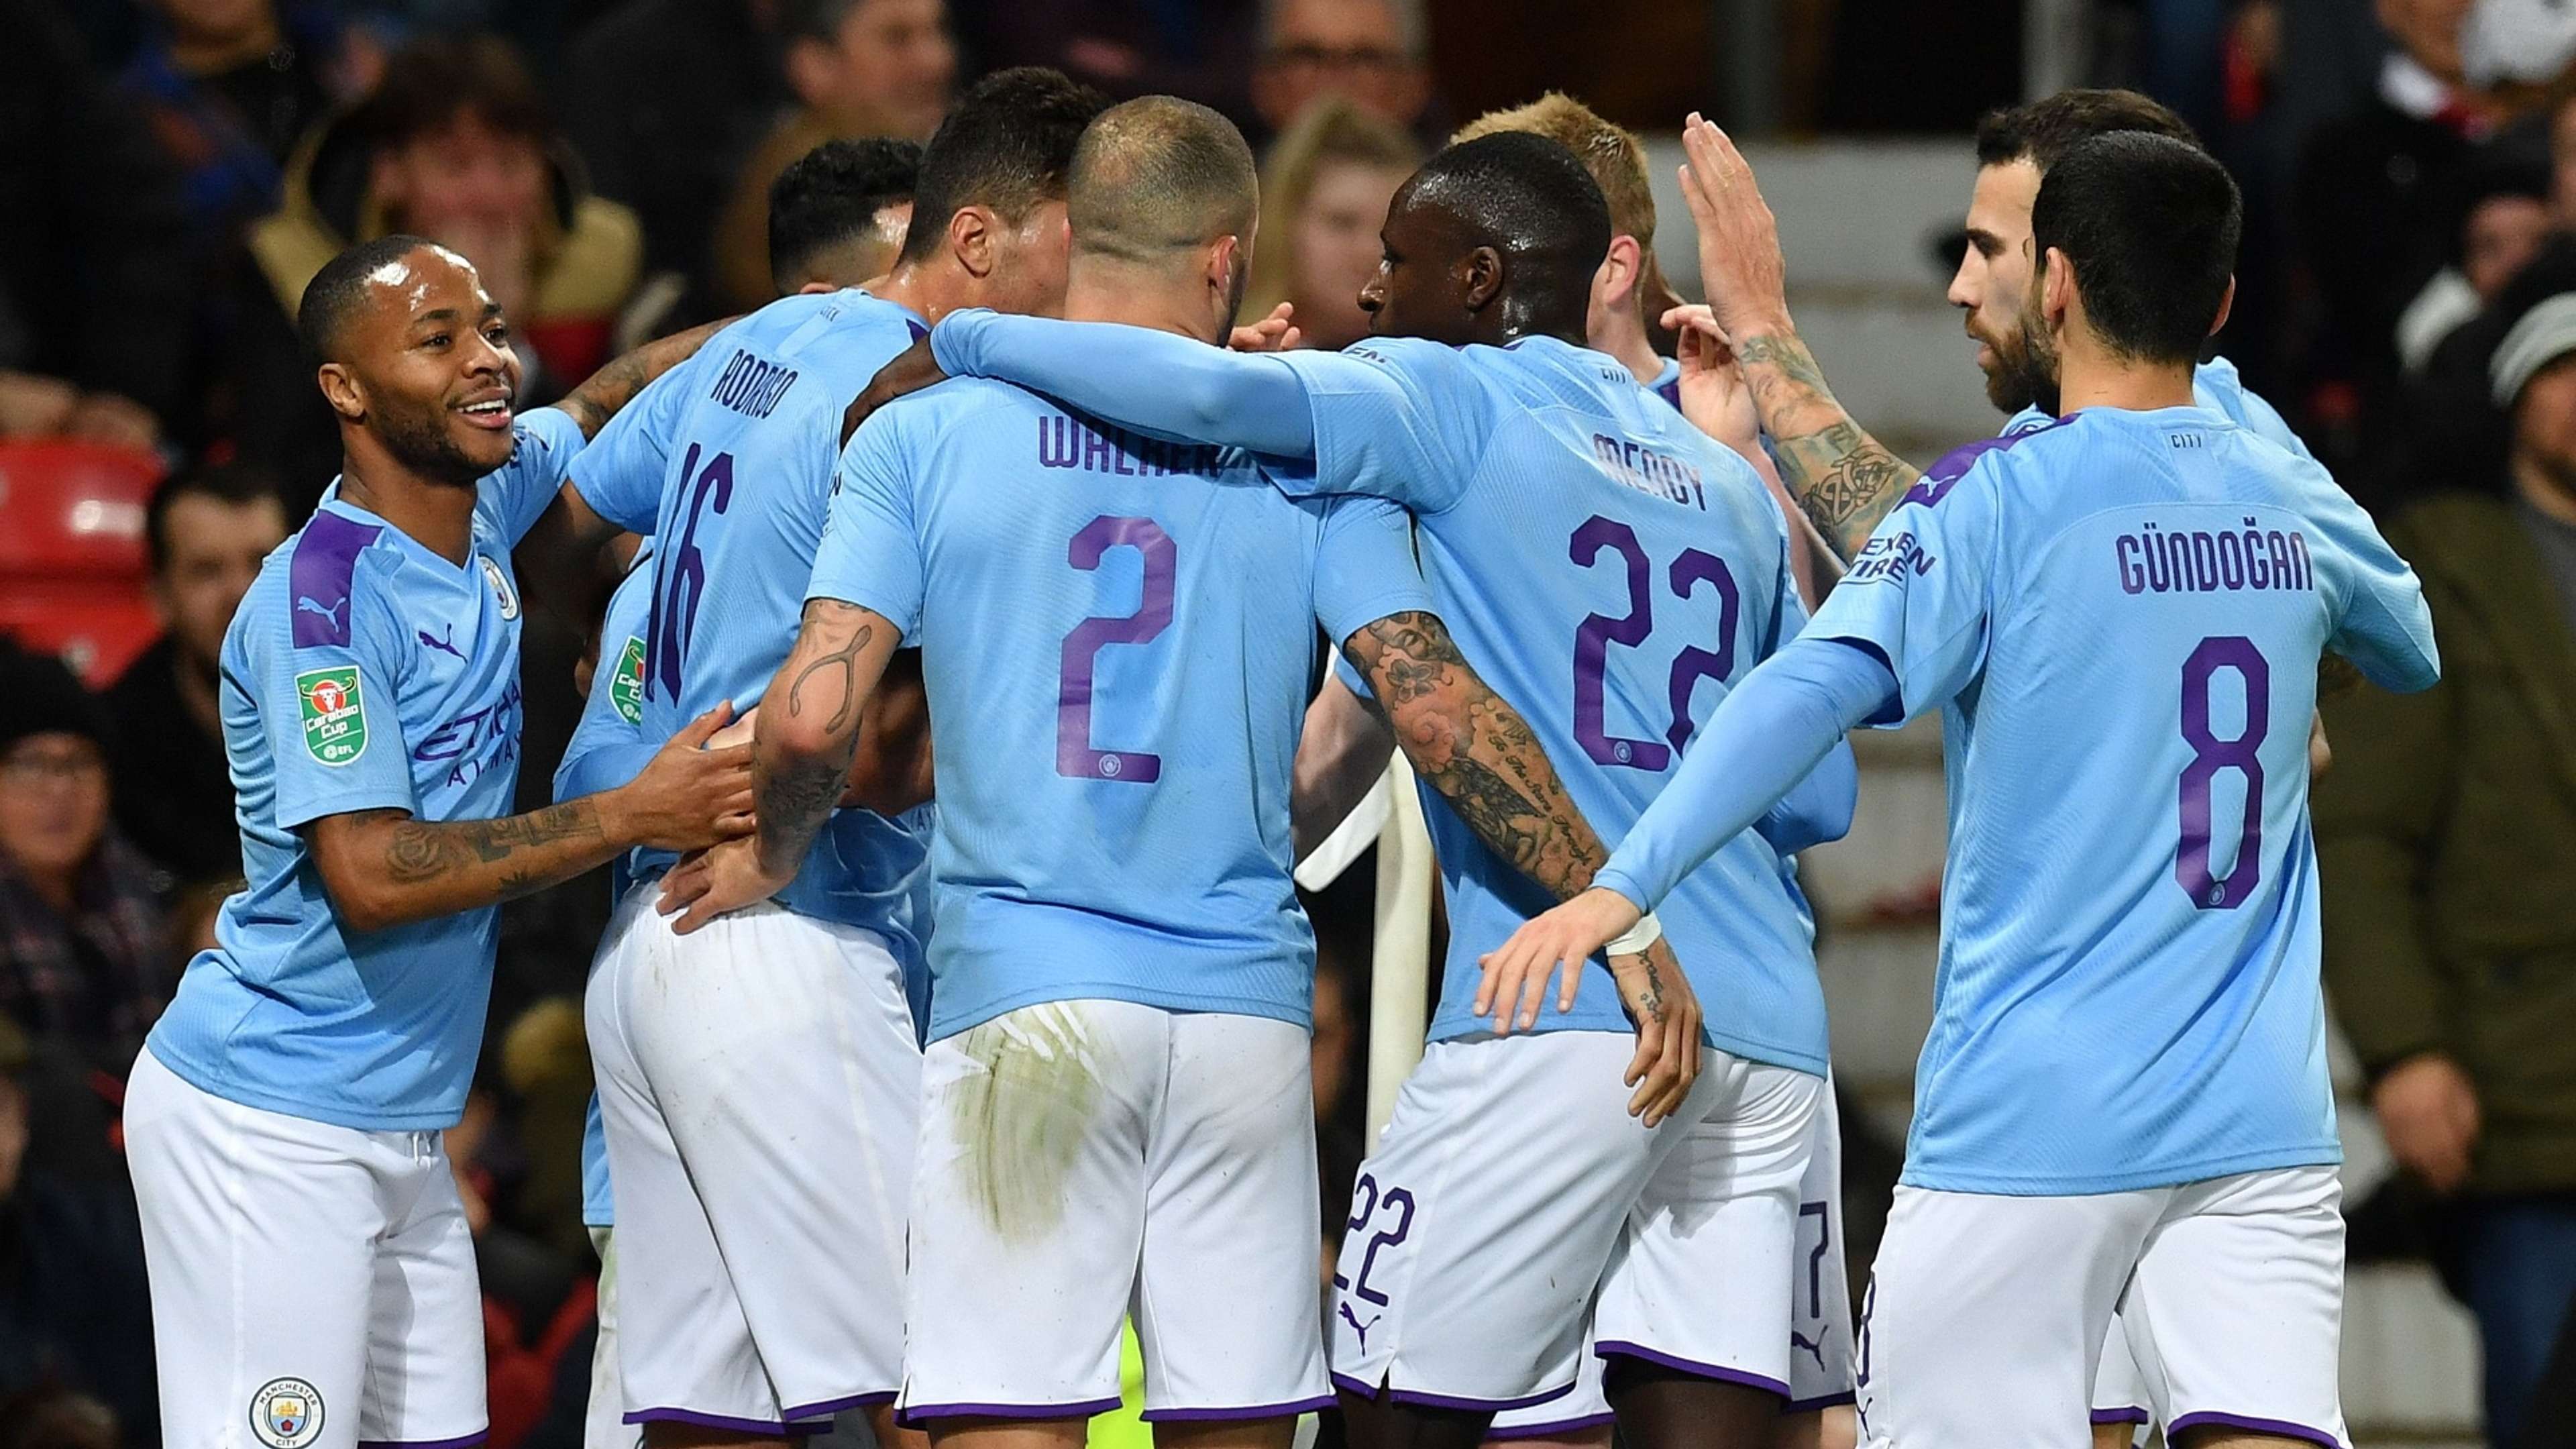 Manchester City celebrate at Old Trafford vs Man Utd 2019-20 Carabao Cup